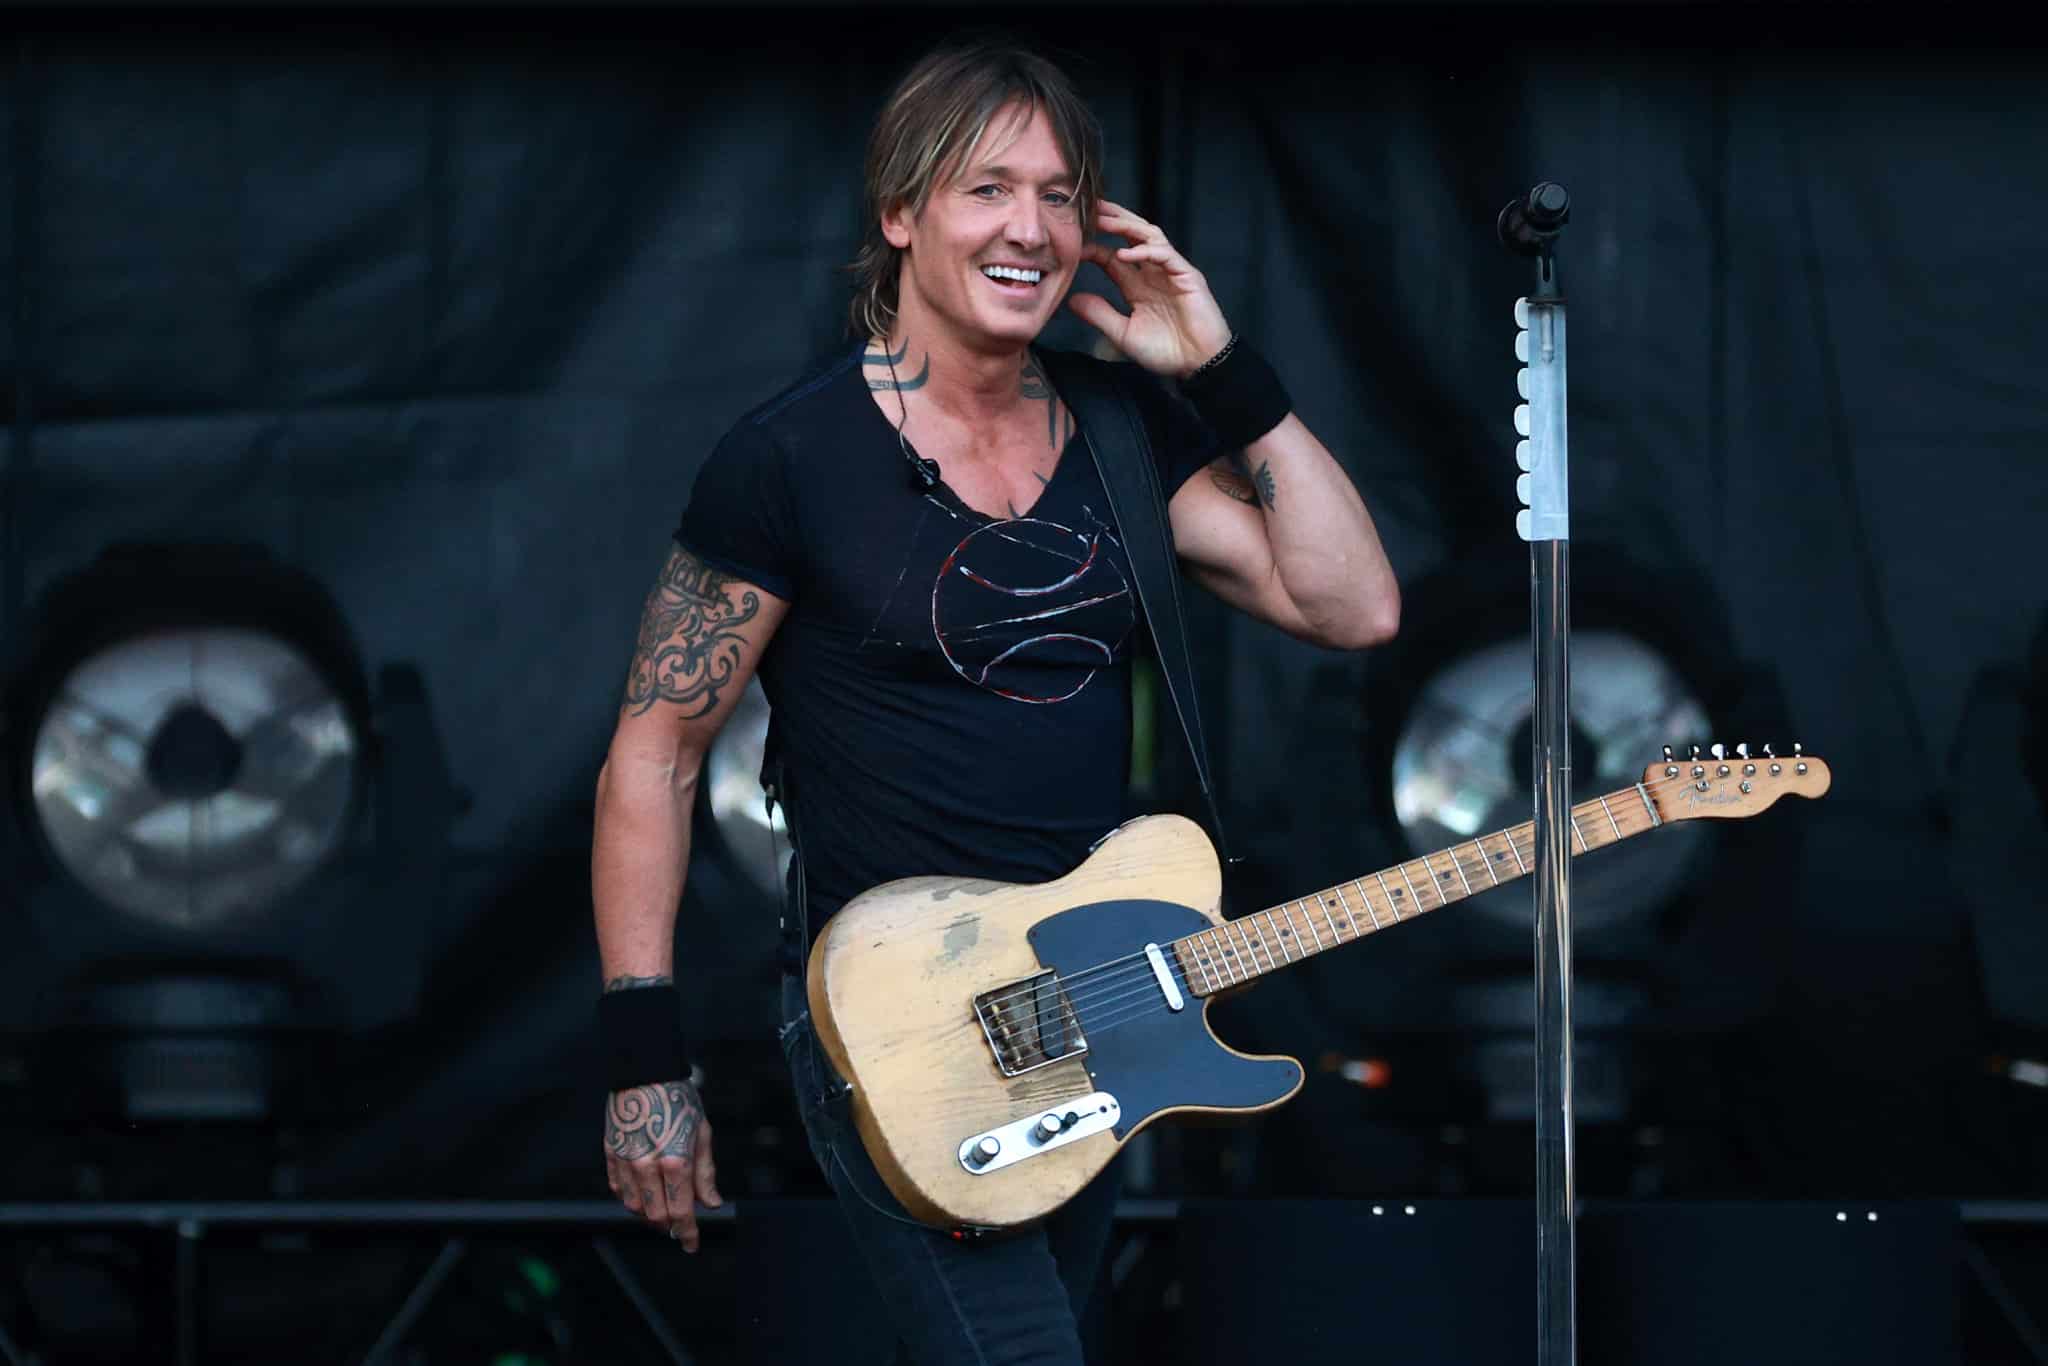 HOUSTON, TEXAS - APRIL 02: Keith Urban performs during the 2023 March Madness Music Festival at Discovery Green on April 2, 2023 in Houston, Texas. (Photo by Mike Lawrie/WireImage)